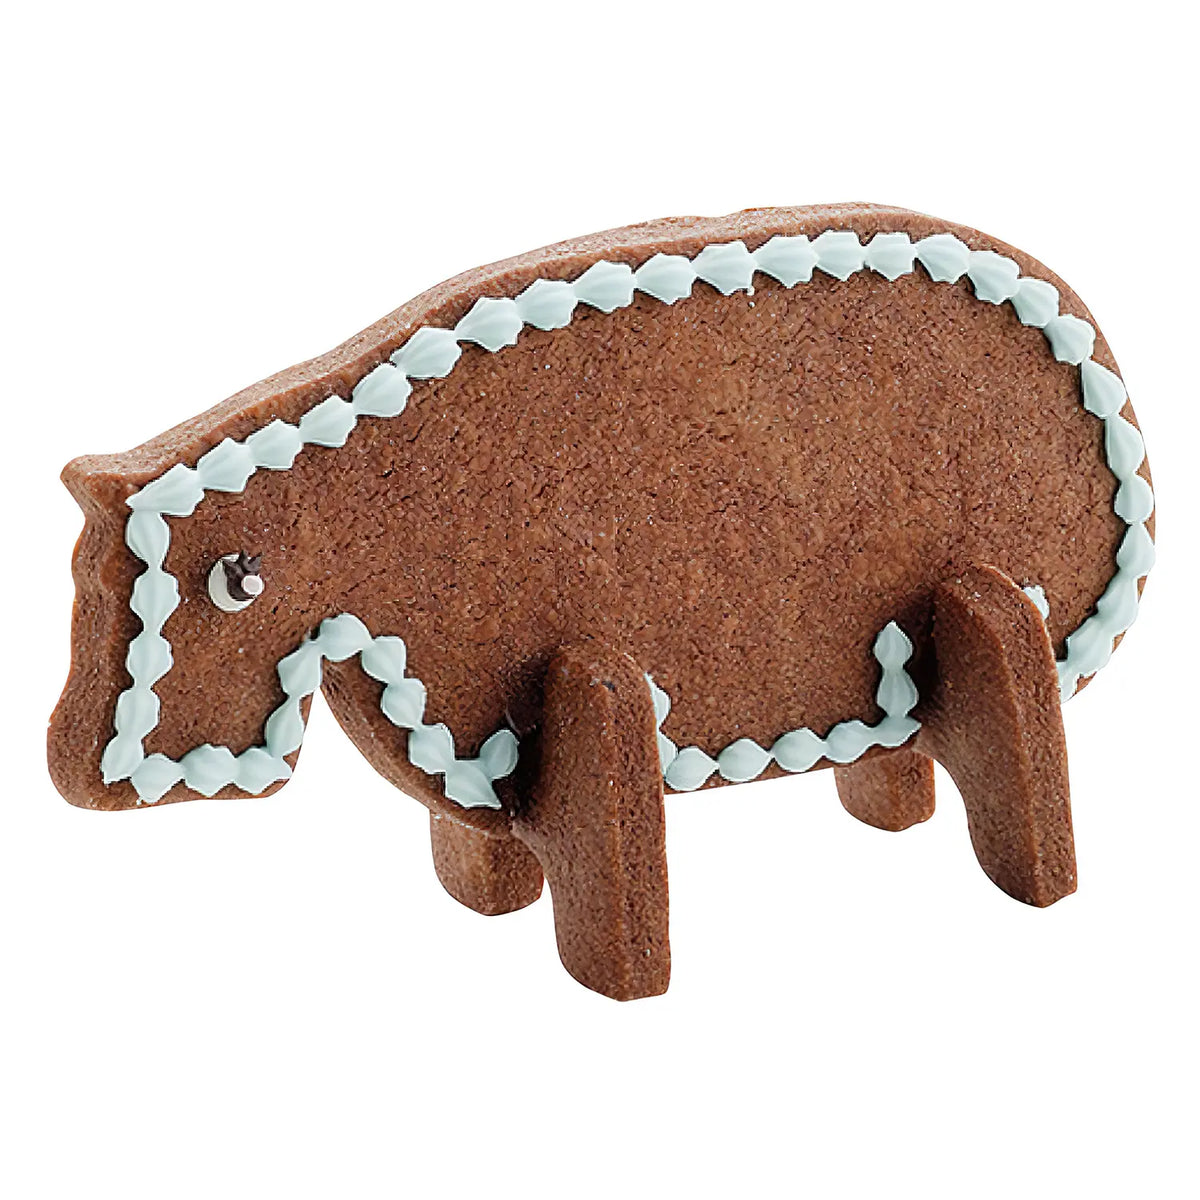 TIGERCROWN Cake Land Stainless Steel Cookie Cutter 3D Hippo